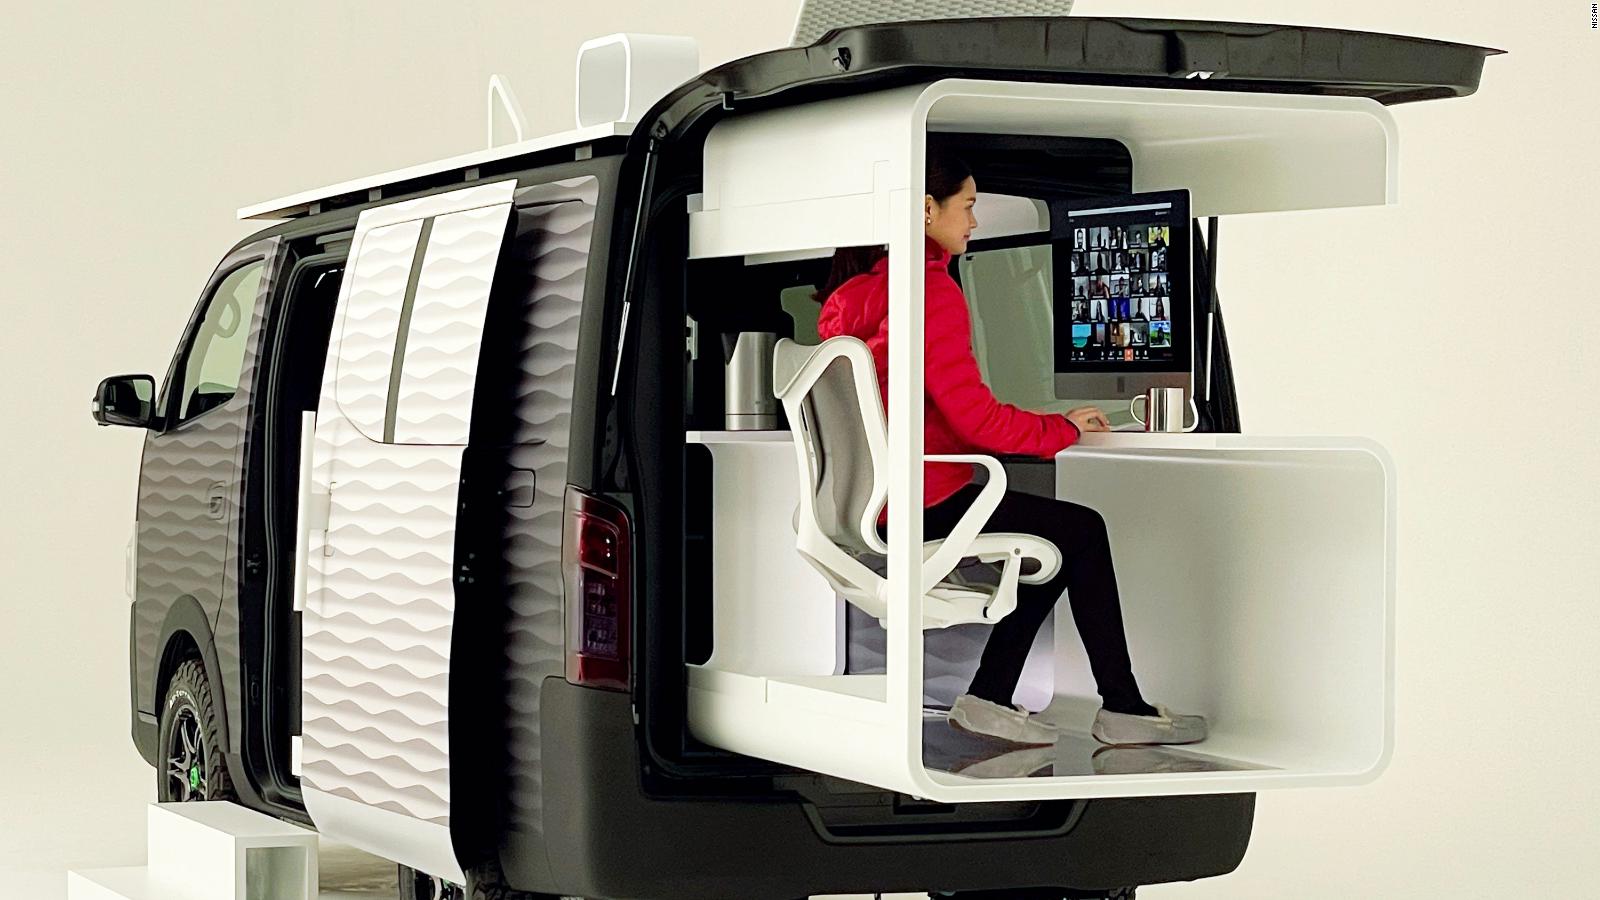 A mobile office to work from anywhere?